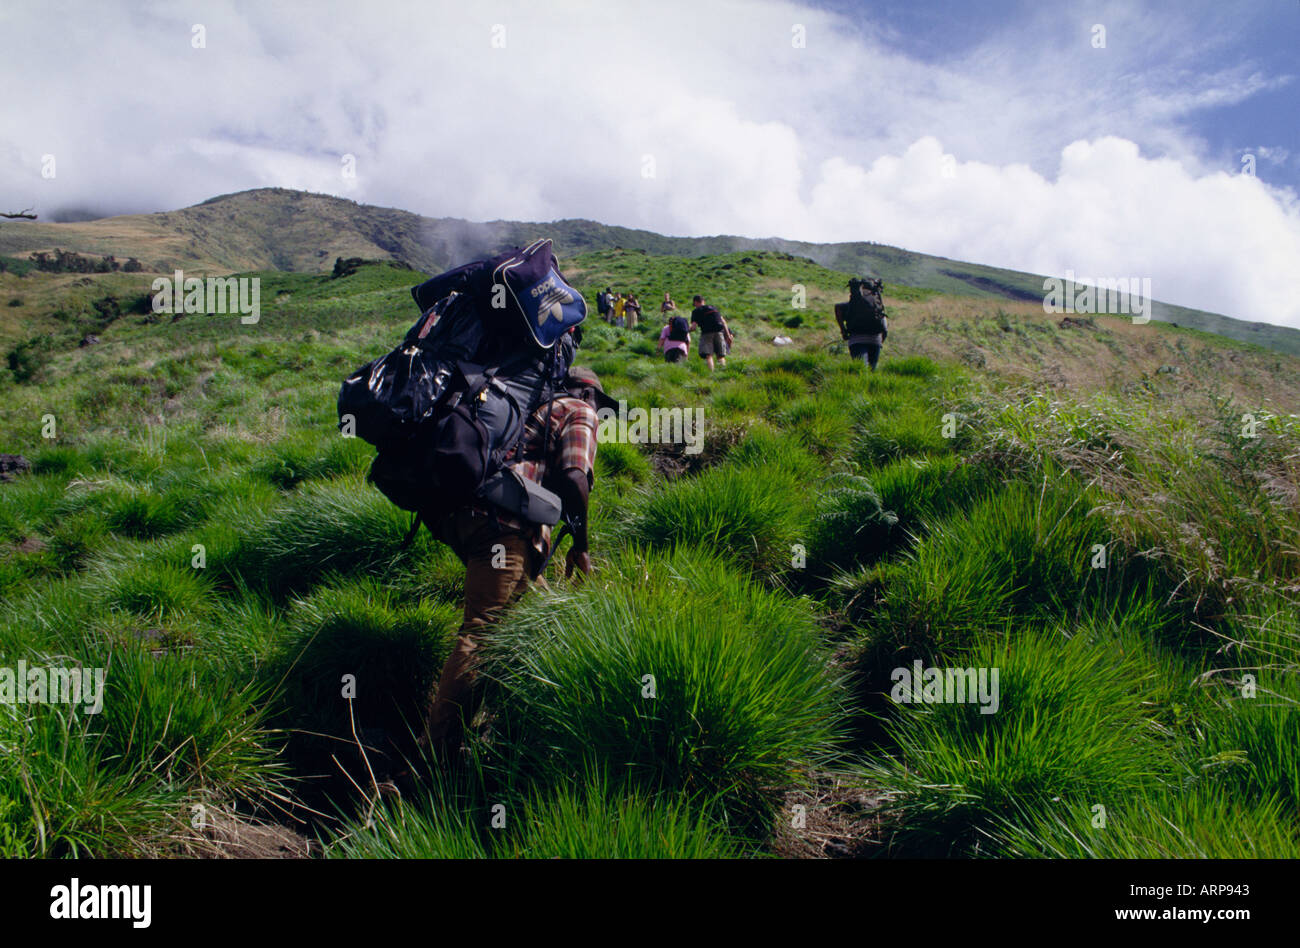 Porters climbing Mount Cameroon West Africa Stock Photo